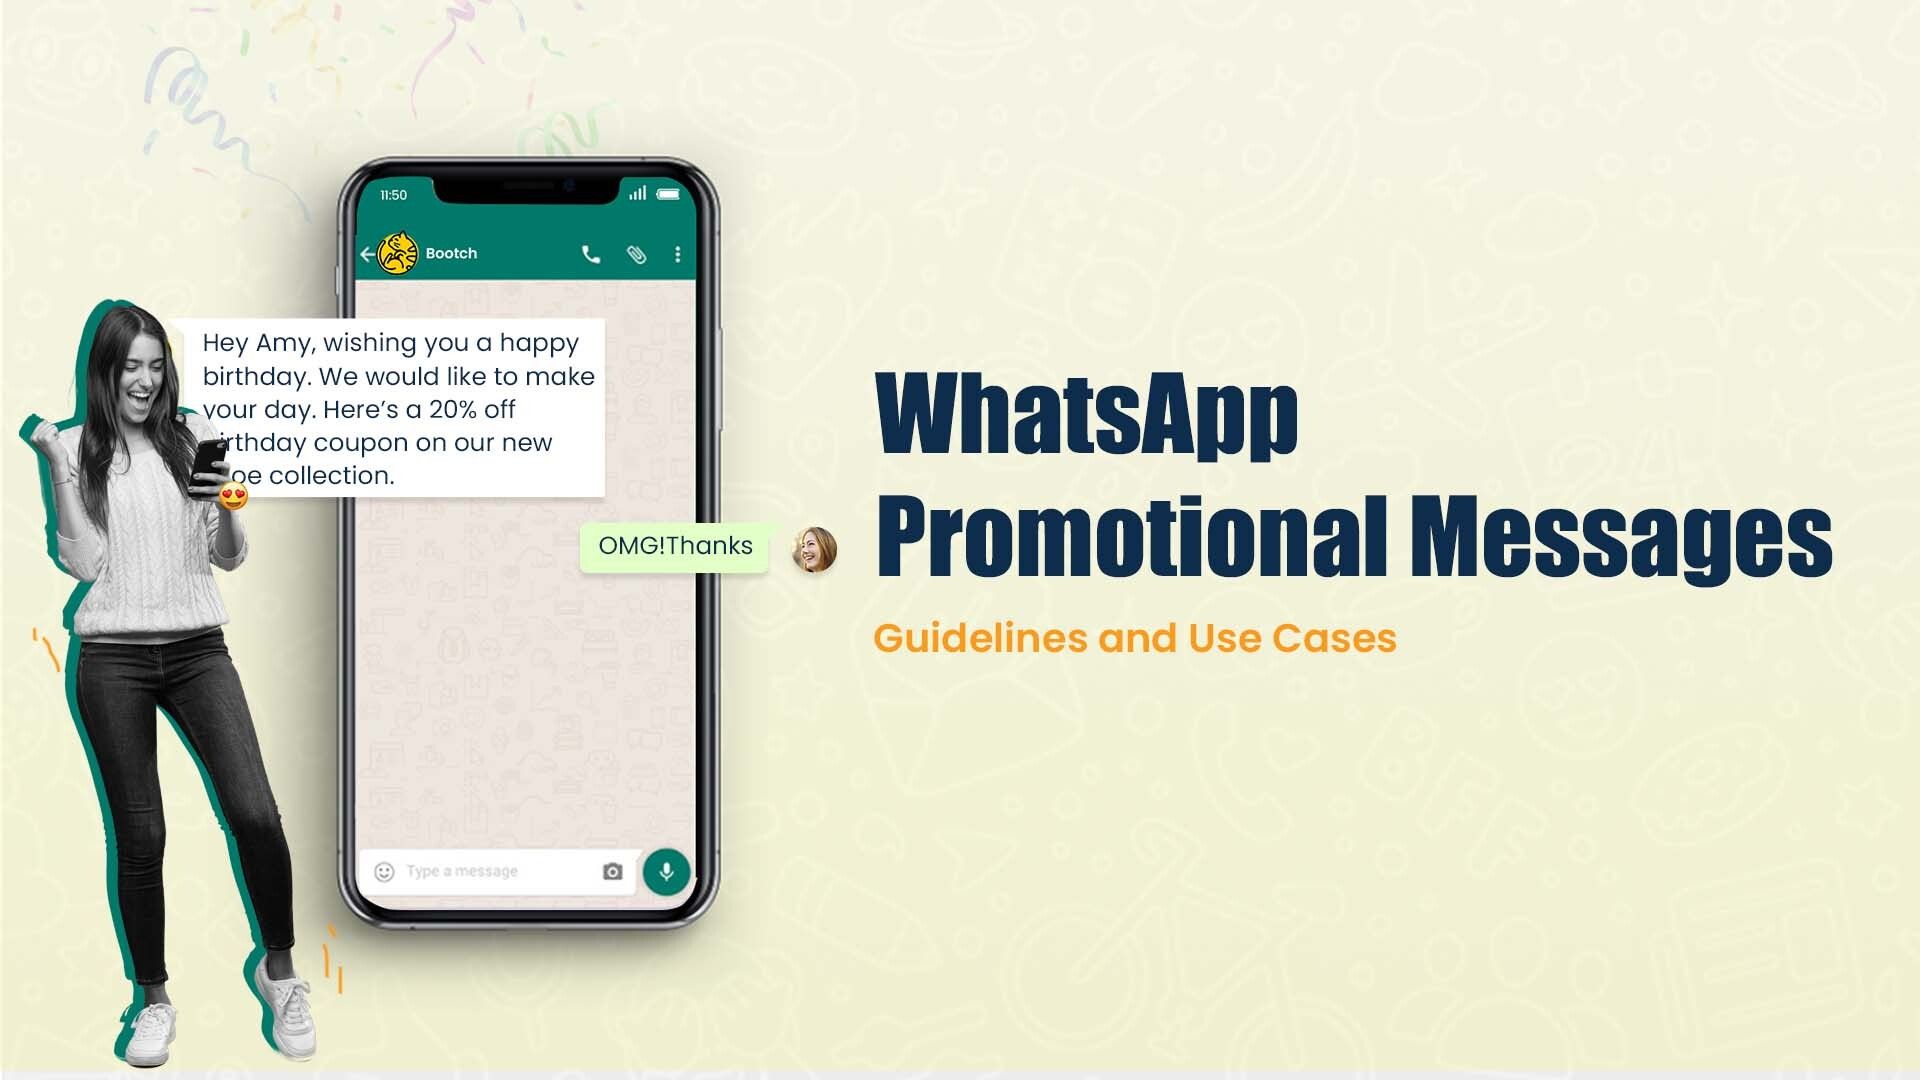 WhatsApp Promotional Messages: Everything You Need to Know